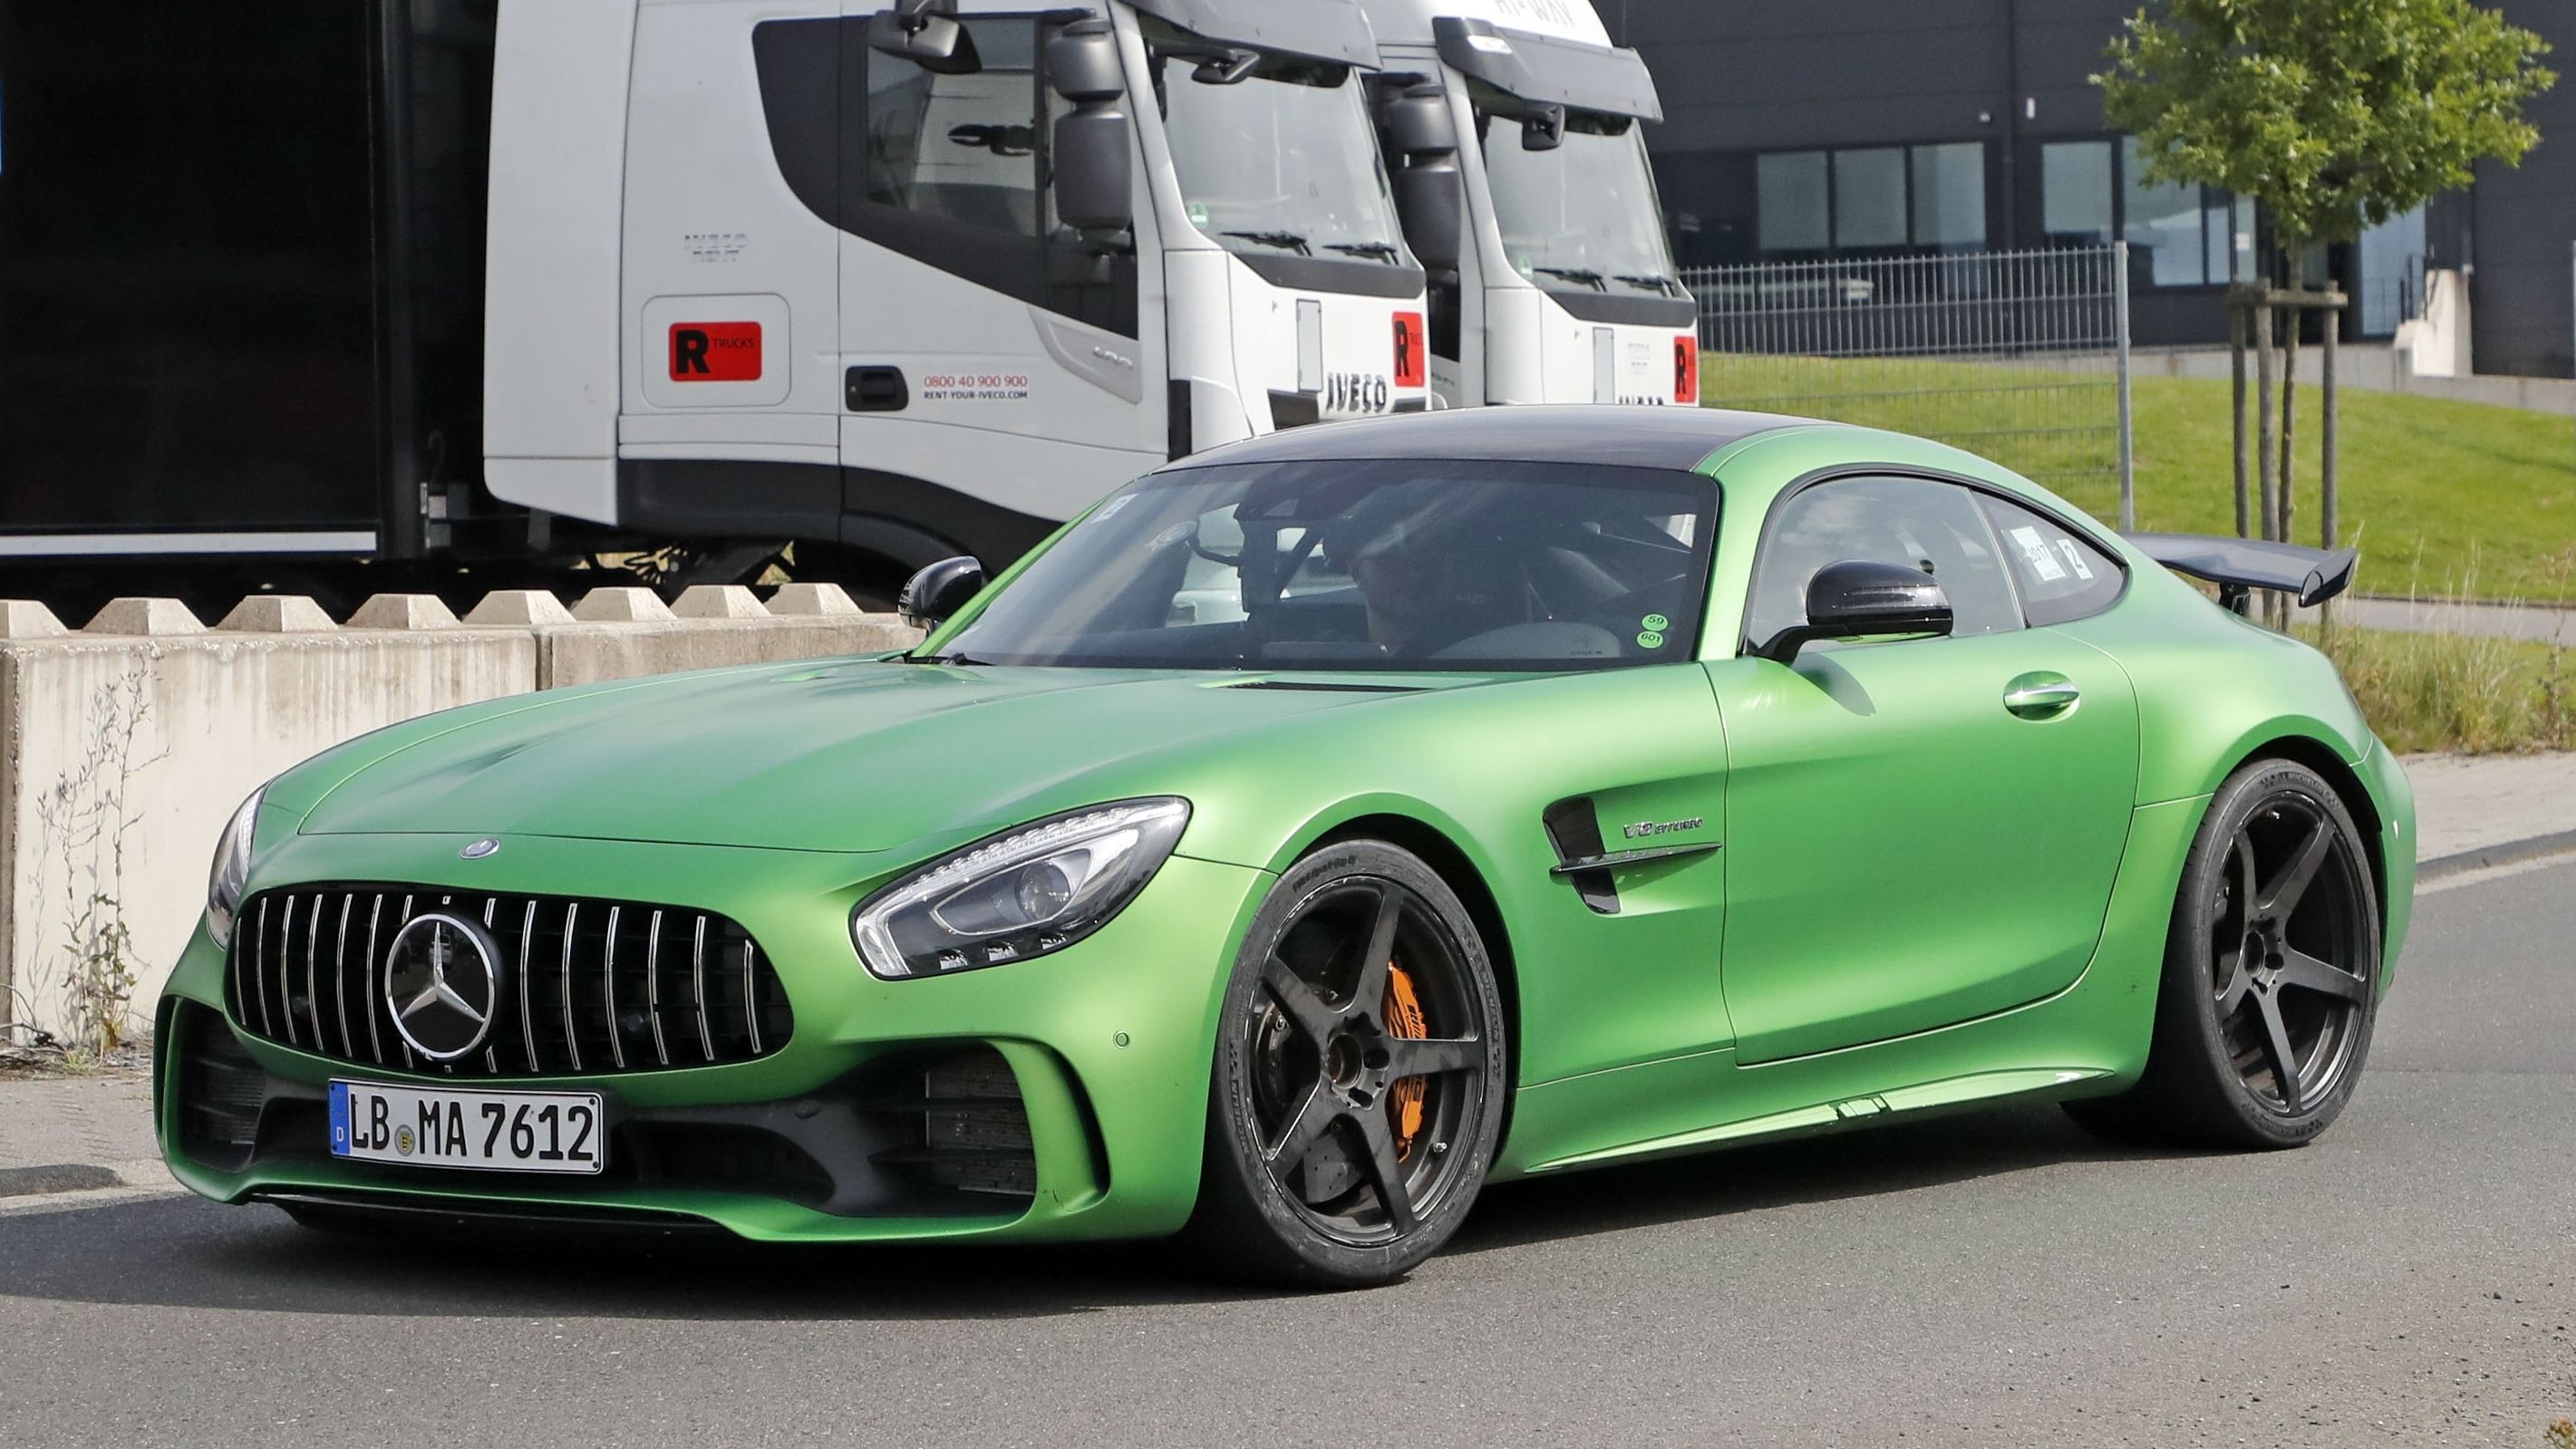 2019 Now That Mercedes Has Launched the AMG GT 4-Door, the AMG GT Black Series Will Follow by 2020